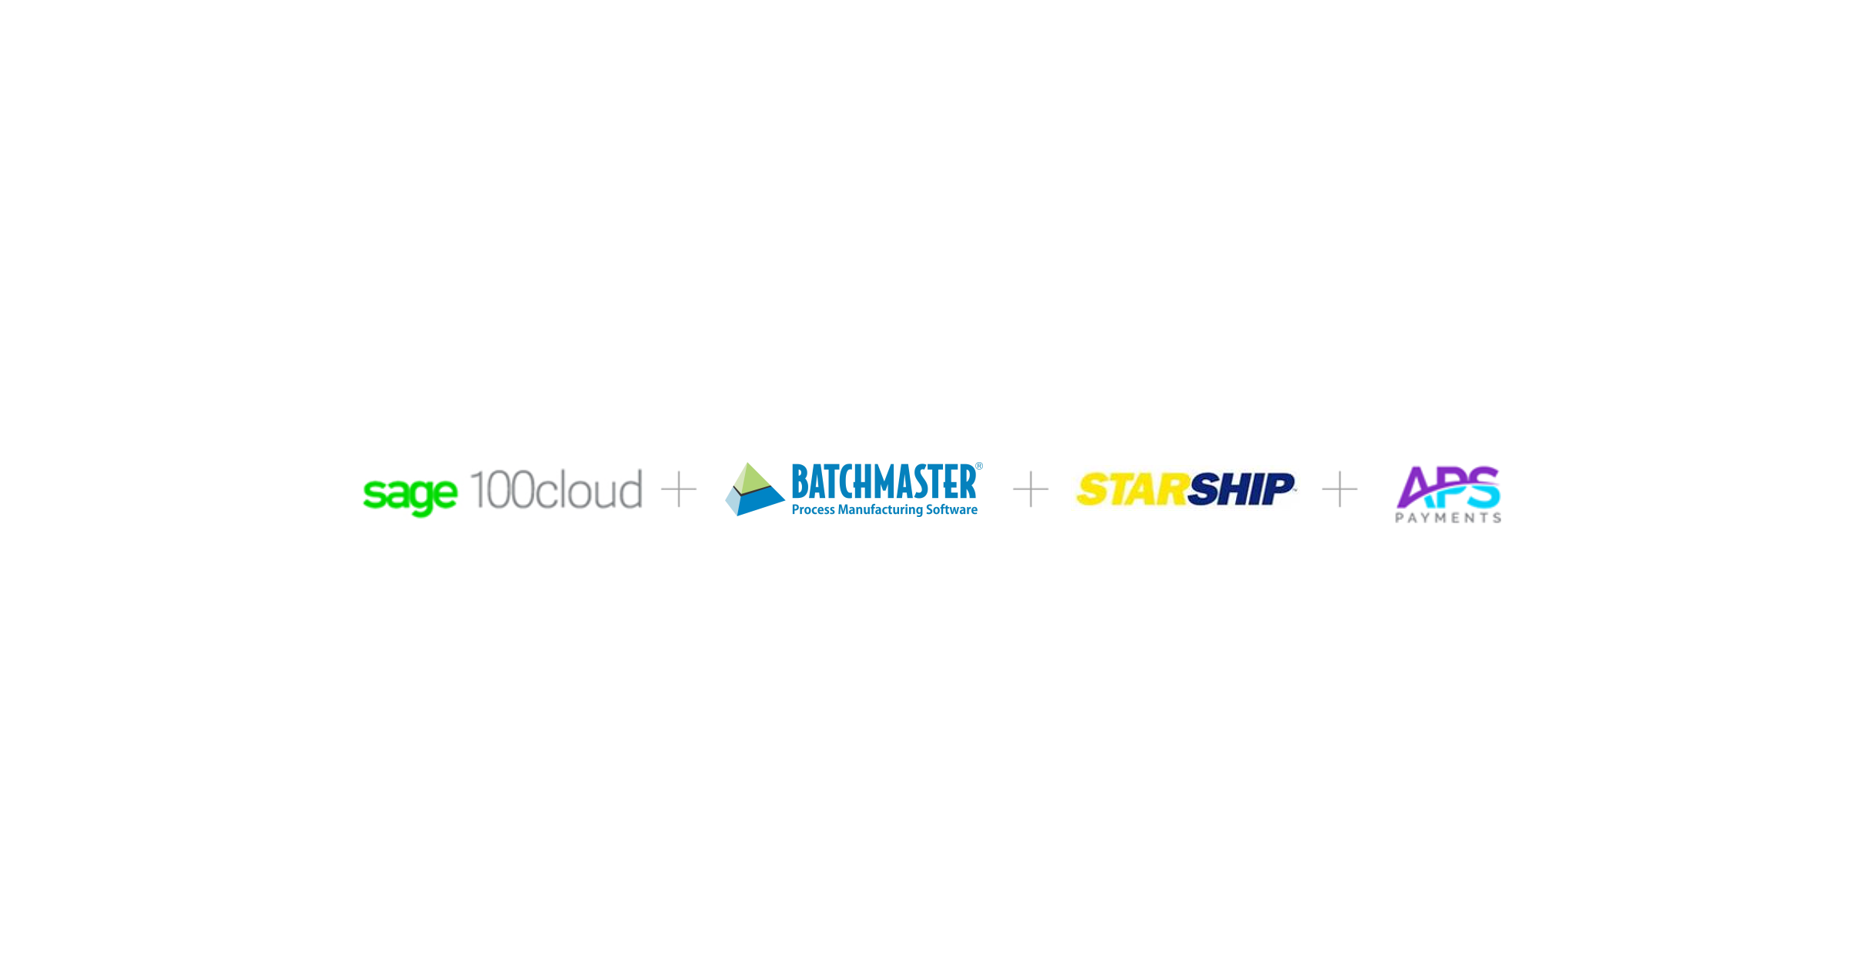 Sage 100cloud: Automate Process Manufacturing, Shipping and Payments